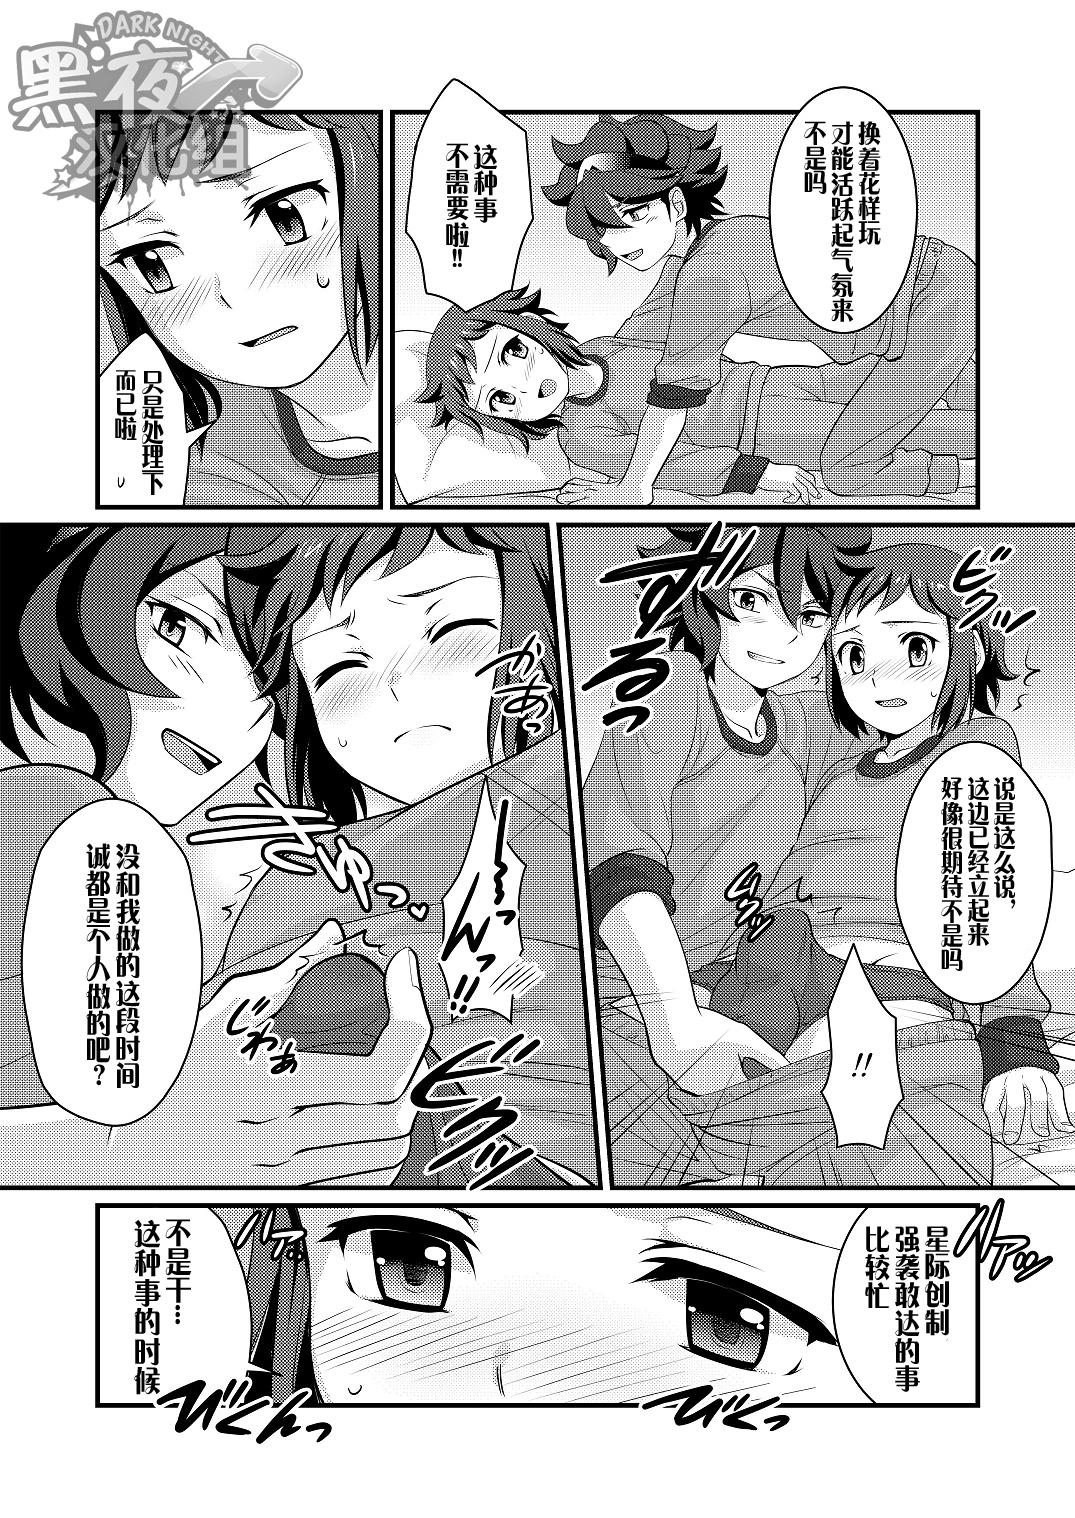 Sloppy Blowjob Builder to Fighter no Naisho Banashi - Gundam build fighters Amateur Sex - Page 7